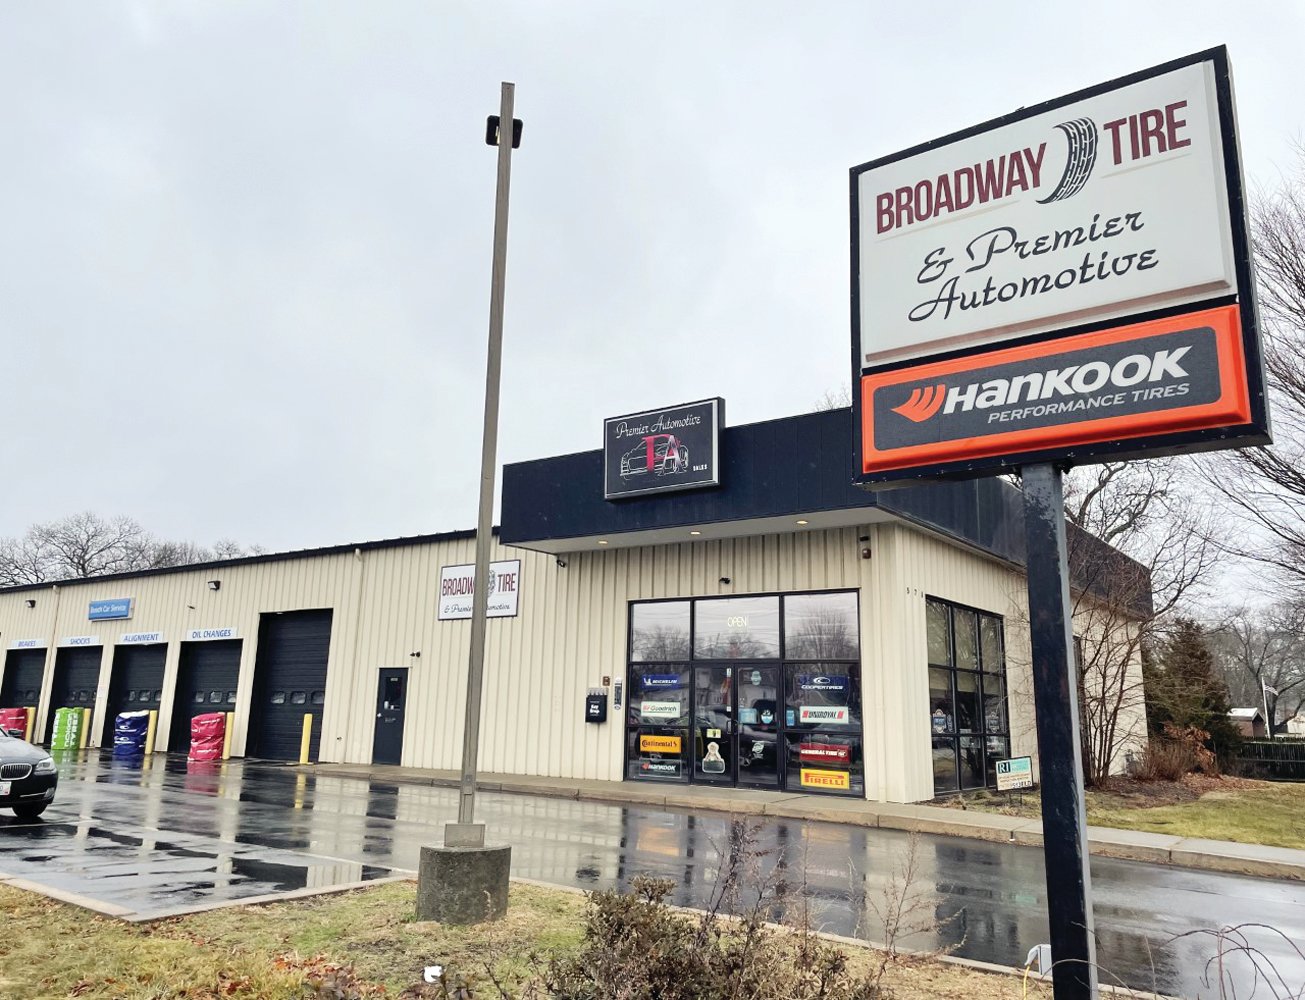 Whether your tire needs to be patched, or your vehicle needs a major repair, make your way to Broadway Tire on Warwick Avenue. For more information on this professional repair shop, visit their website at www.broadwaytireri.com.